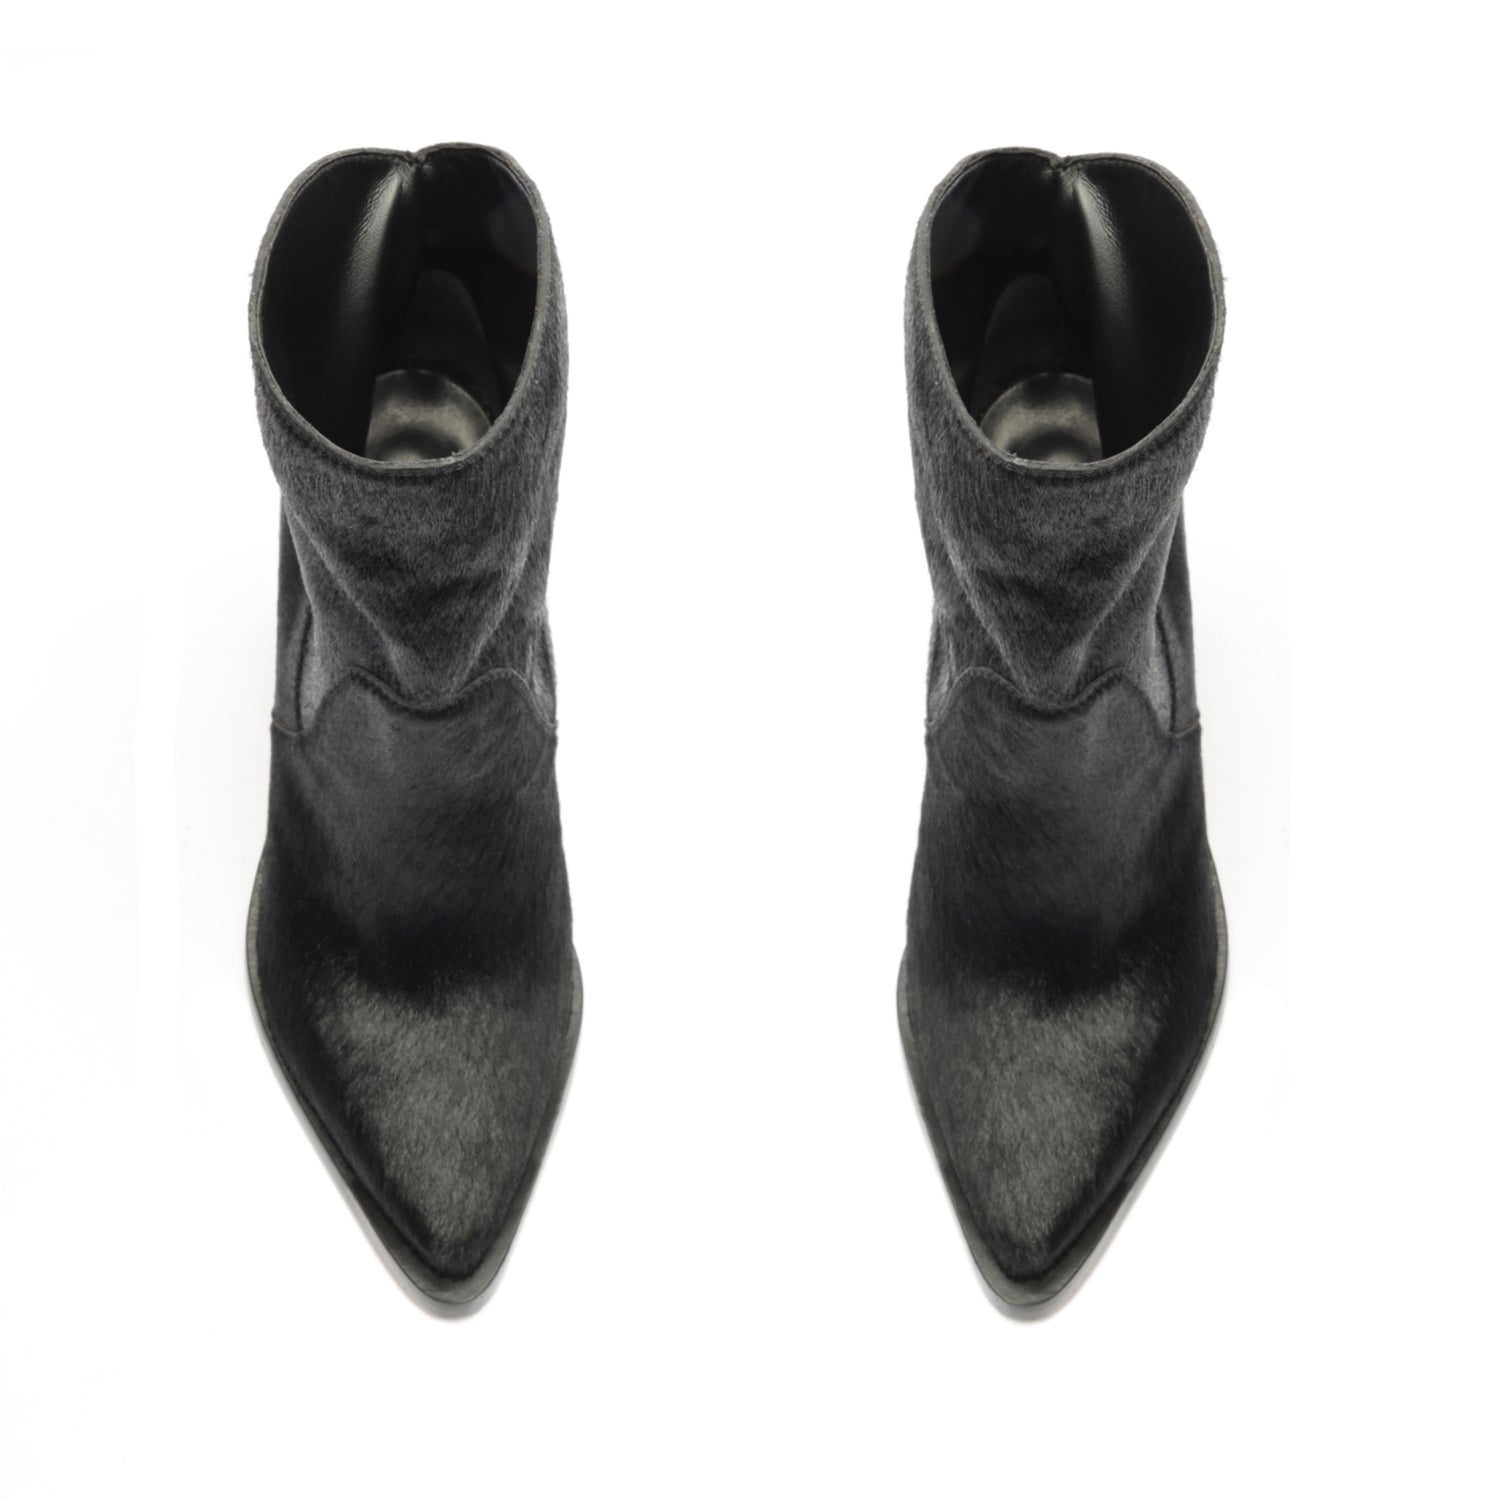 Misty Calf Hair Leather Bootie Booties FALL 23    - Schutz Shoes